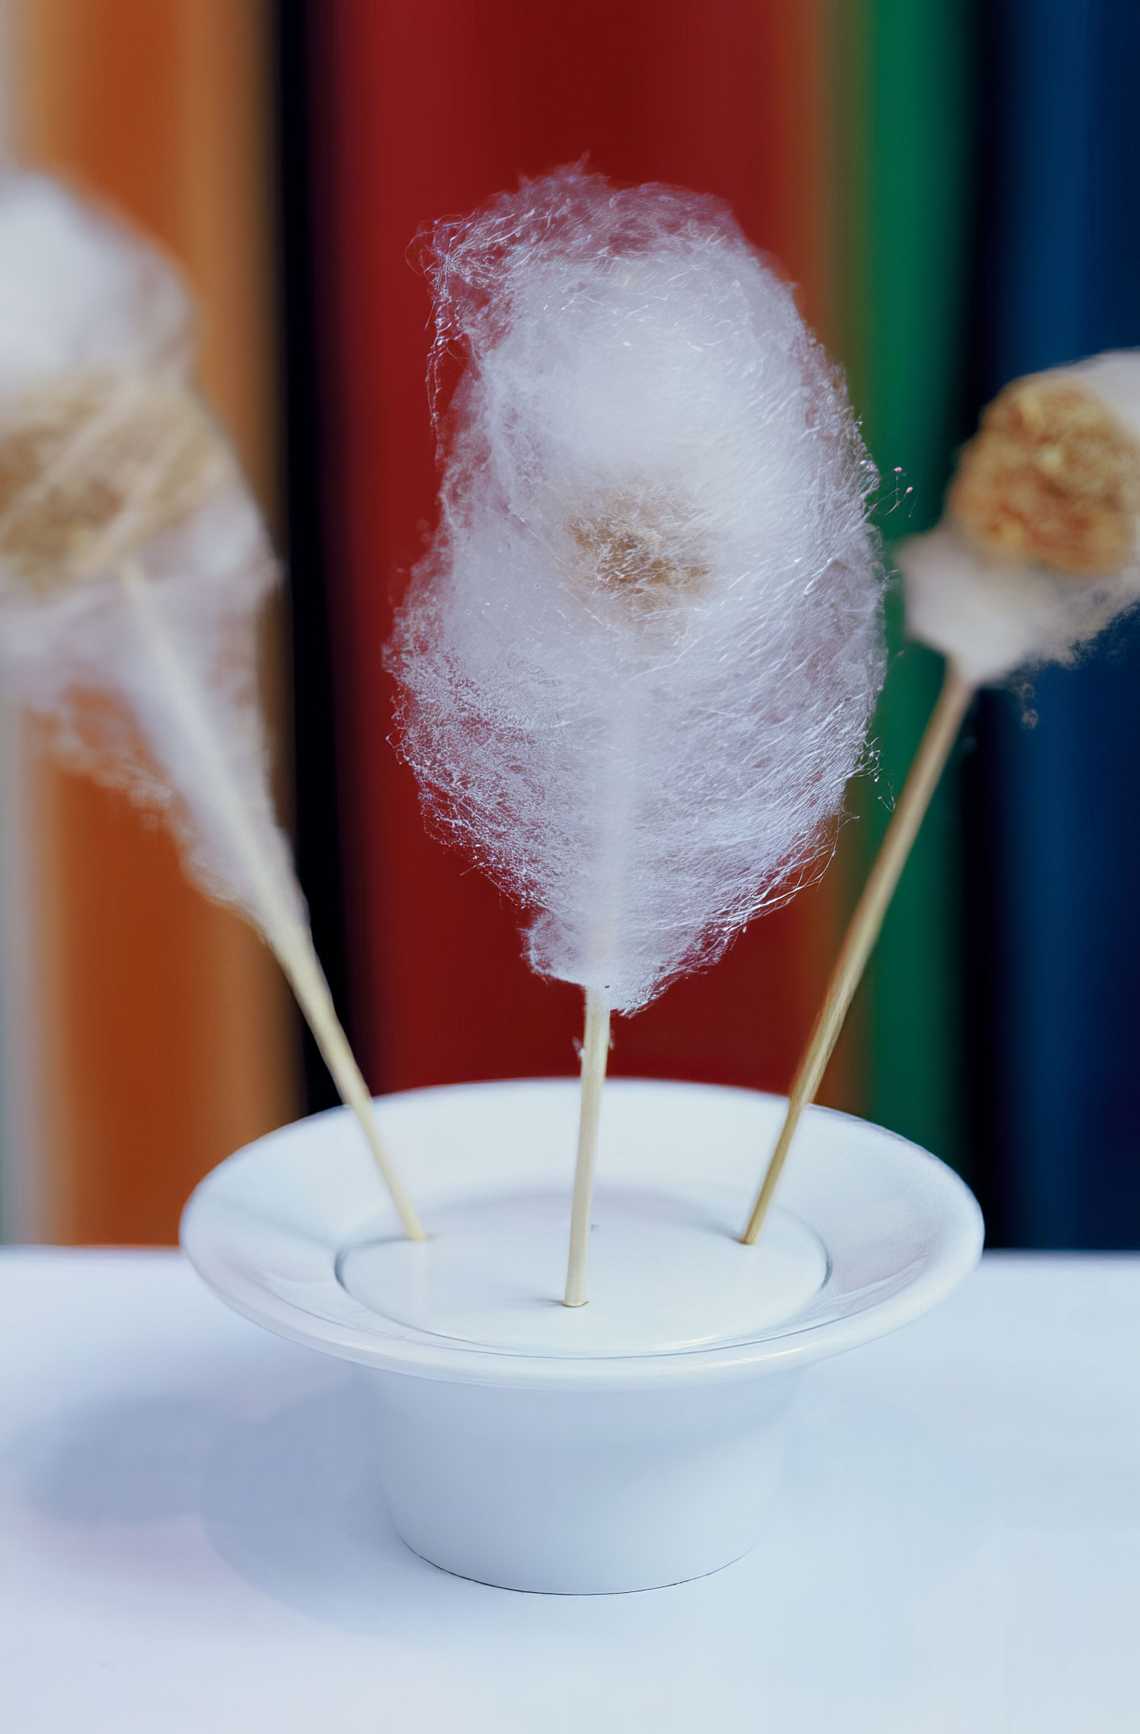 SLS Las Vegas Cotton Candy Foie Gras, to be served at Bazaar Meat